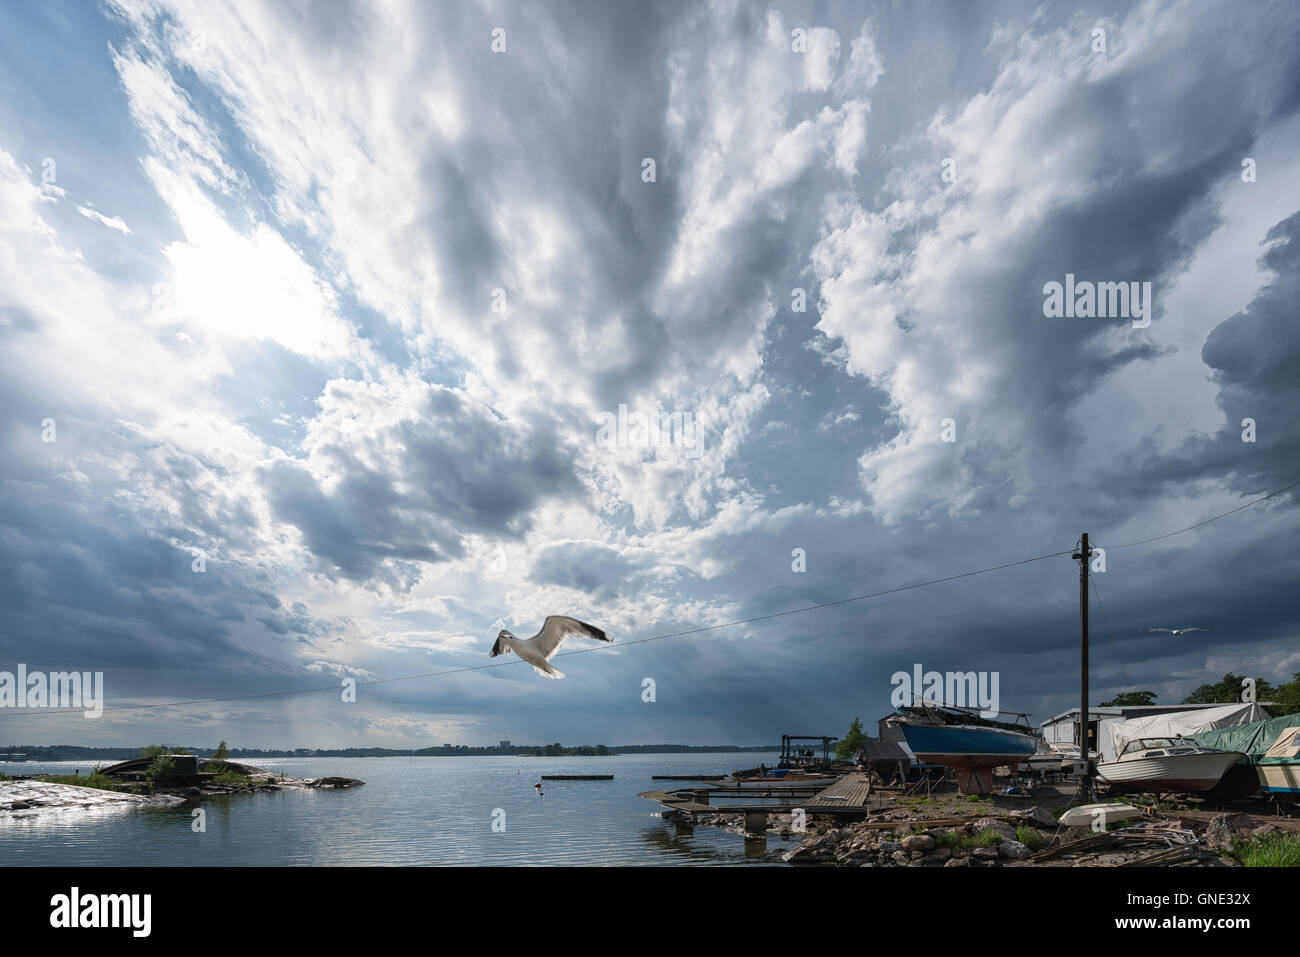 Sky clearing up after a storm, Helsinki, Finland, Europe, EU Stock Photo